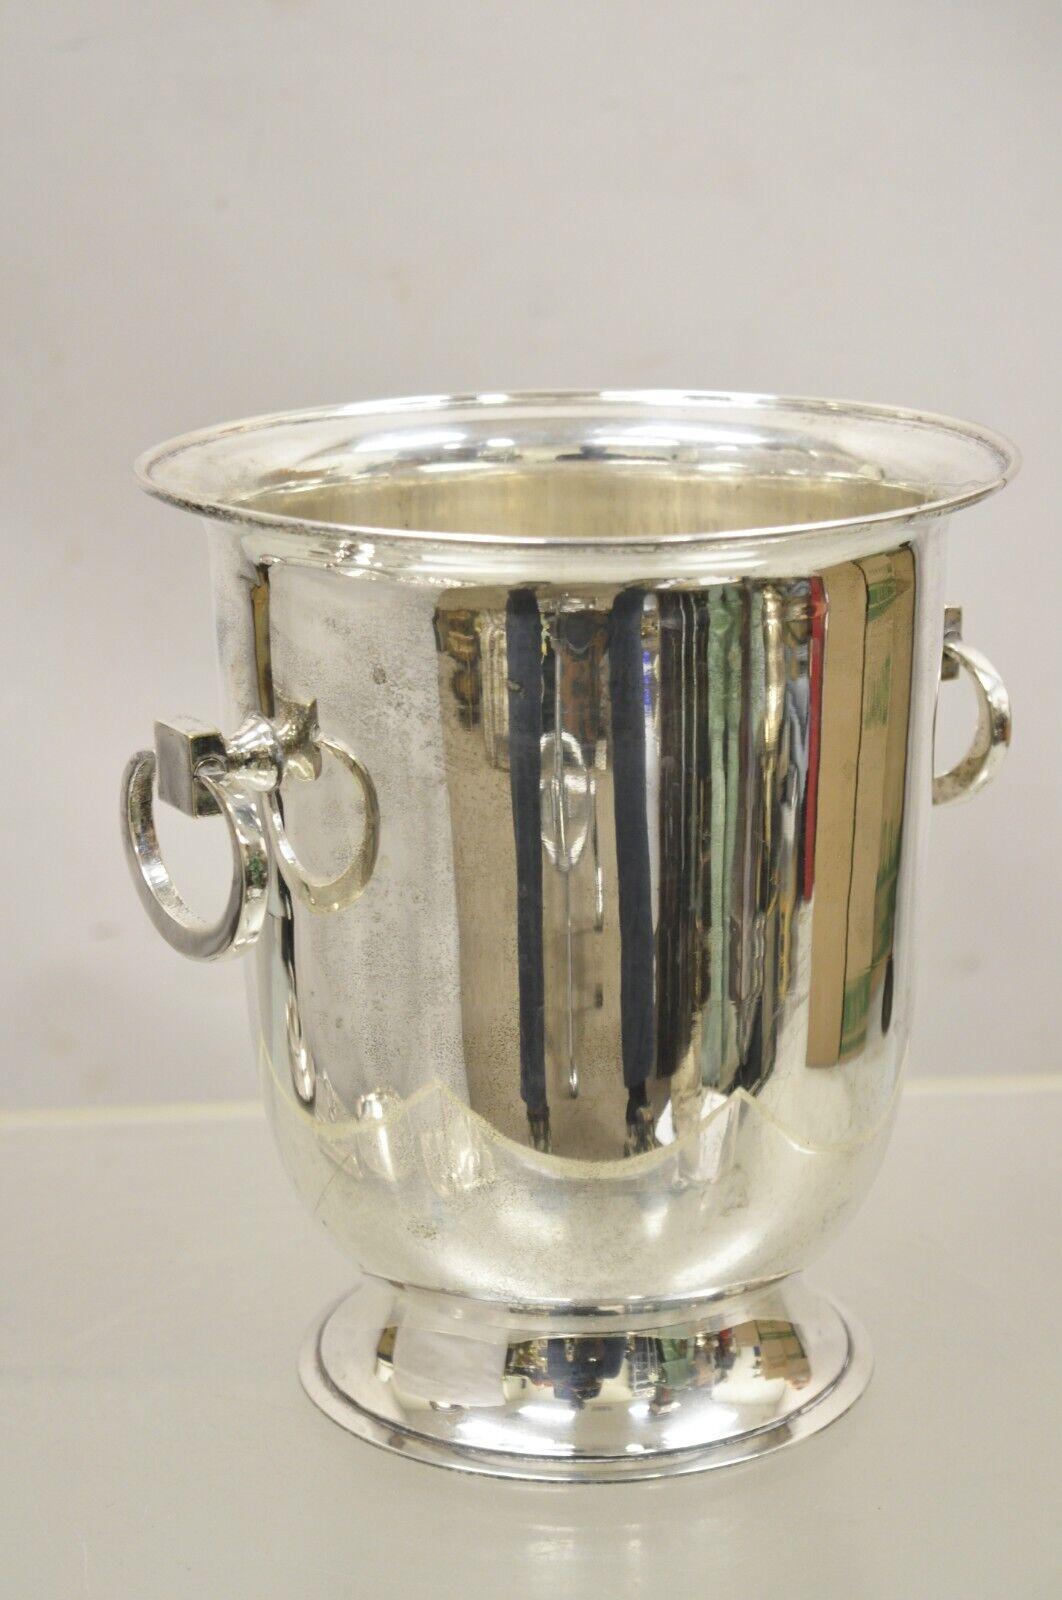 Vintage WA Modern Silver Plated Fluted Wine Chiller Champagne Ice Bucket. Item features drop ring handles, very nice vintage item, clean modernist lines, great style and form. Circa Mid 20th Century. Measurements: 9